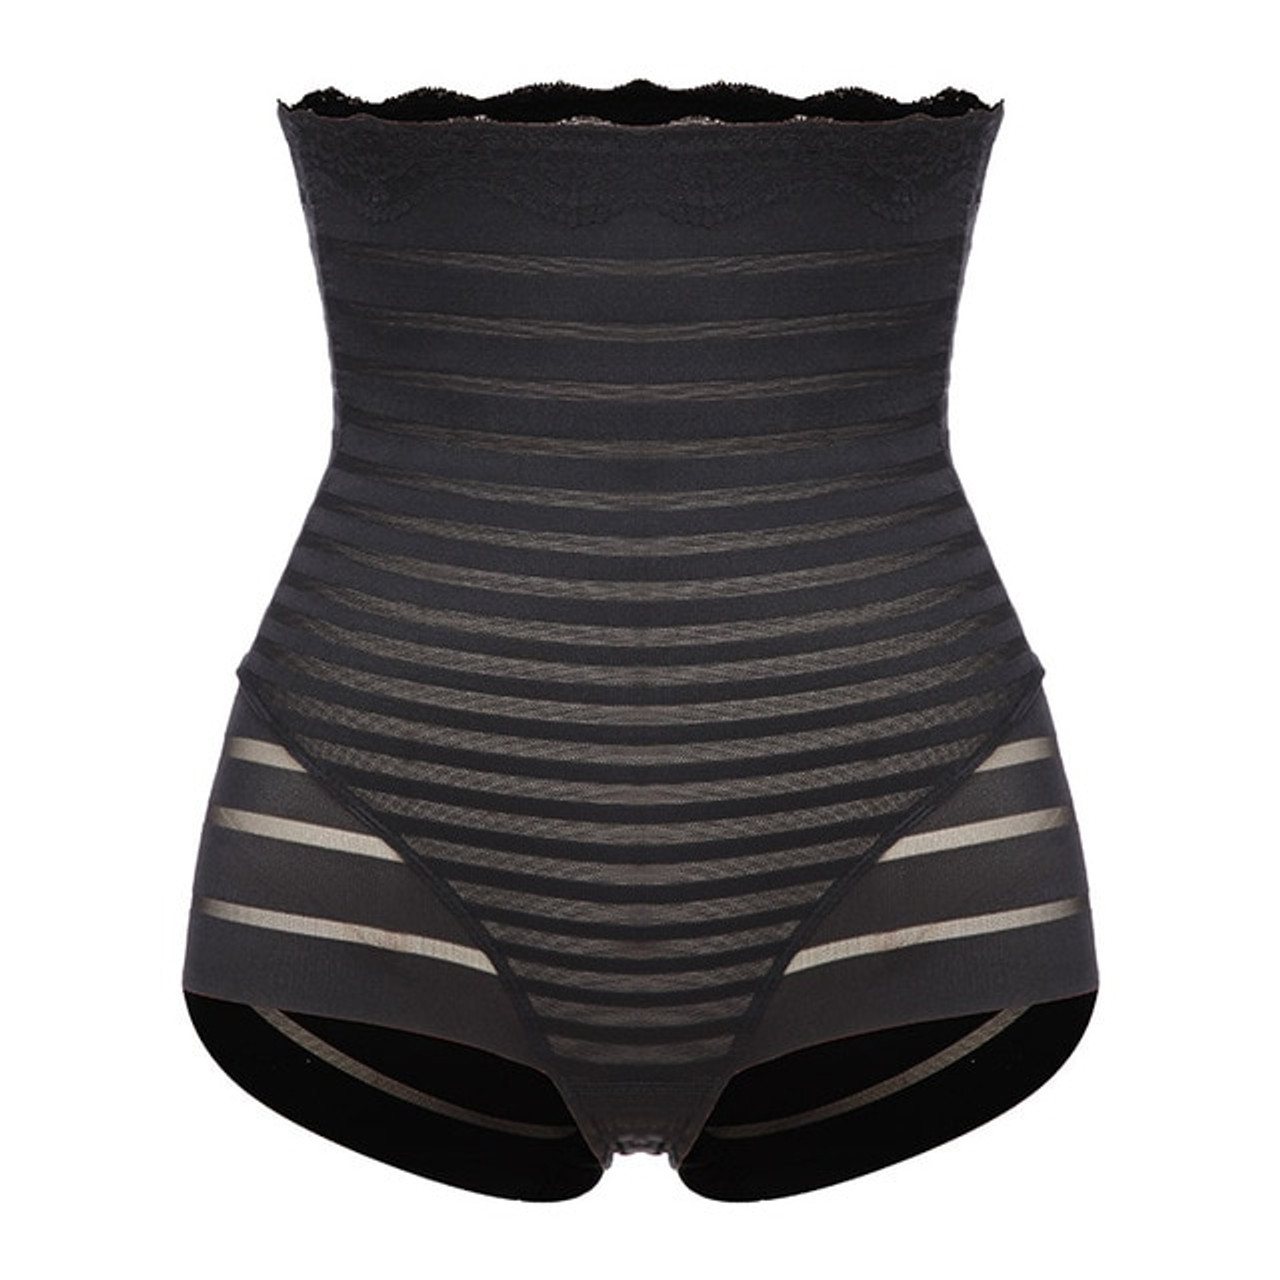 Miss Moly High Waist Trainer Slimming Shapewear Women Body Shapers